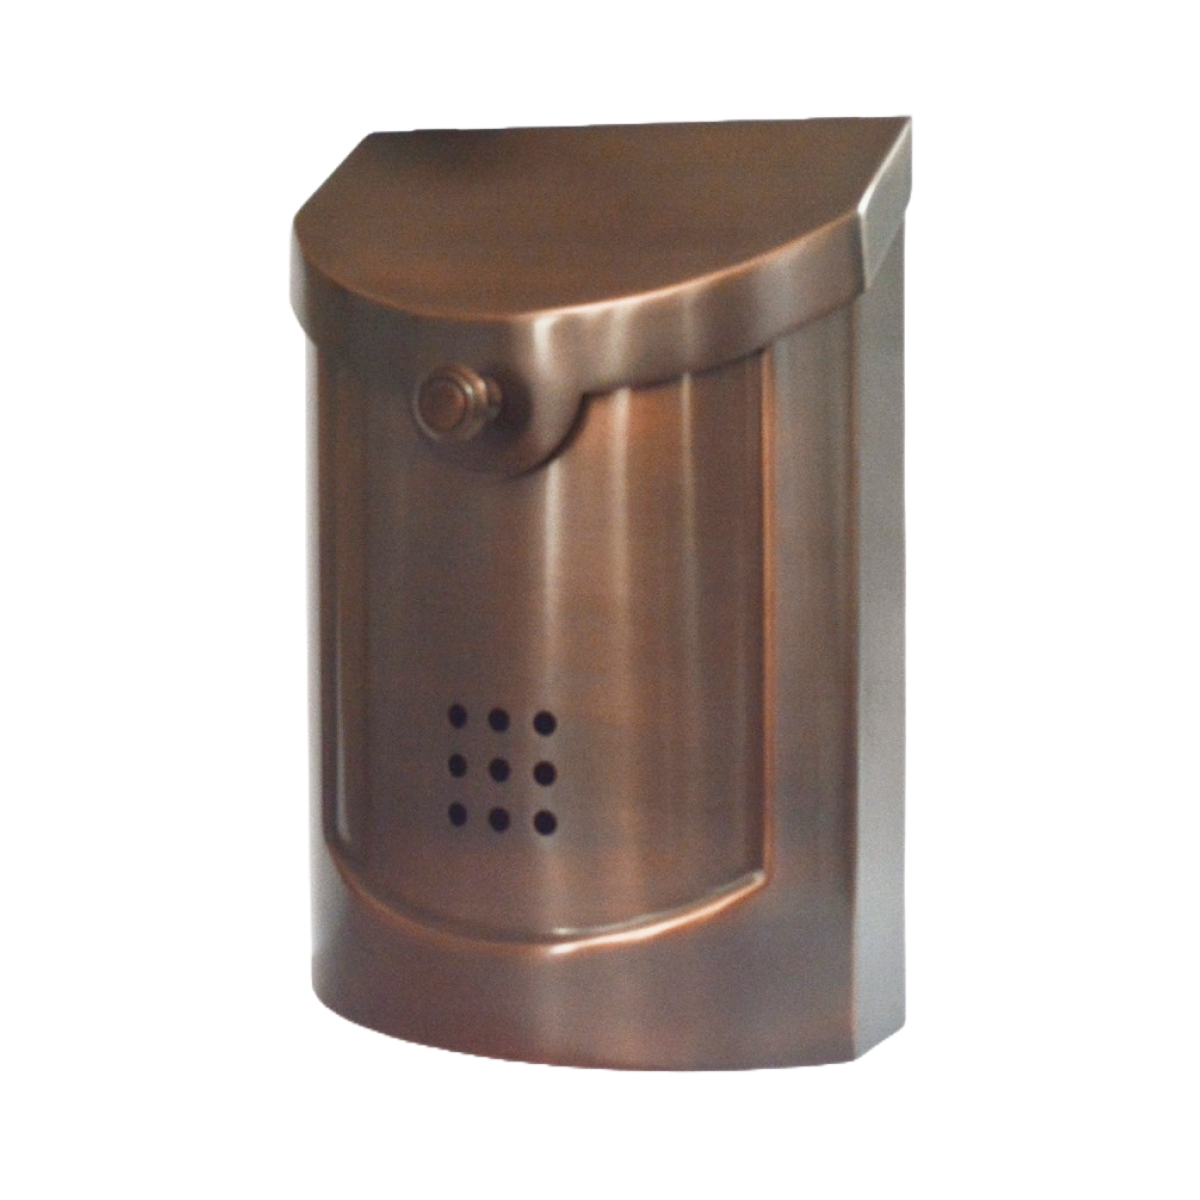 Ecco 5 Wall Mount Residential Mailbox Product Image